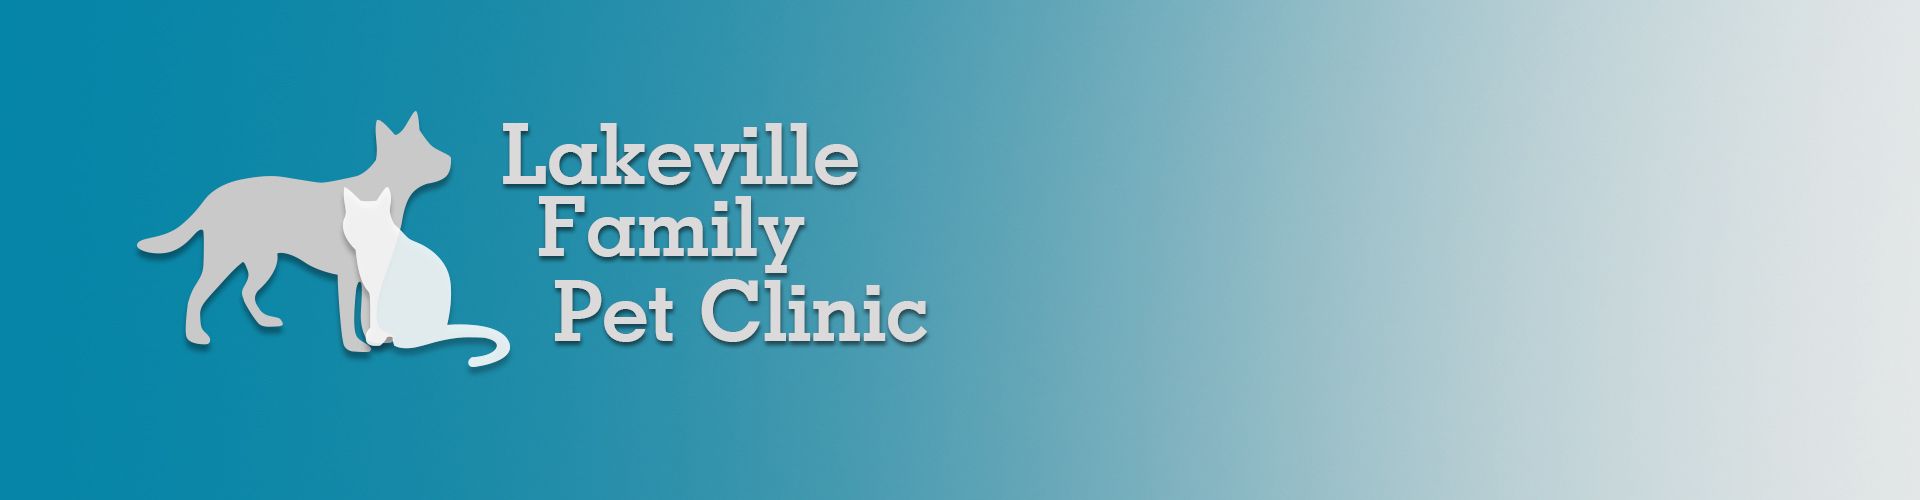 Lakeville Family Pet Clinic | Veterinarian in Lakeville MN